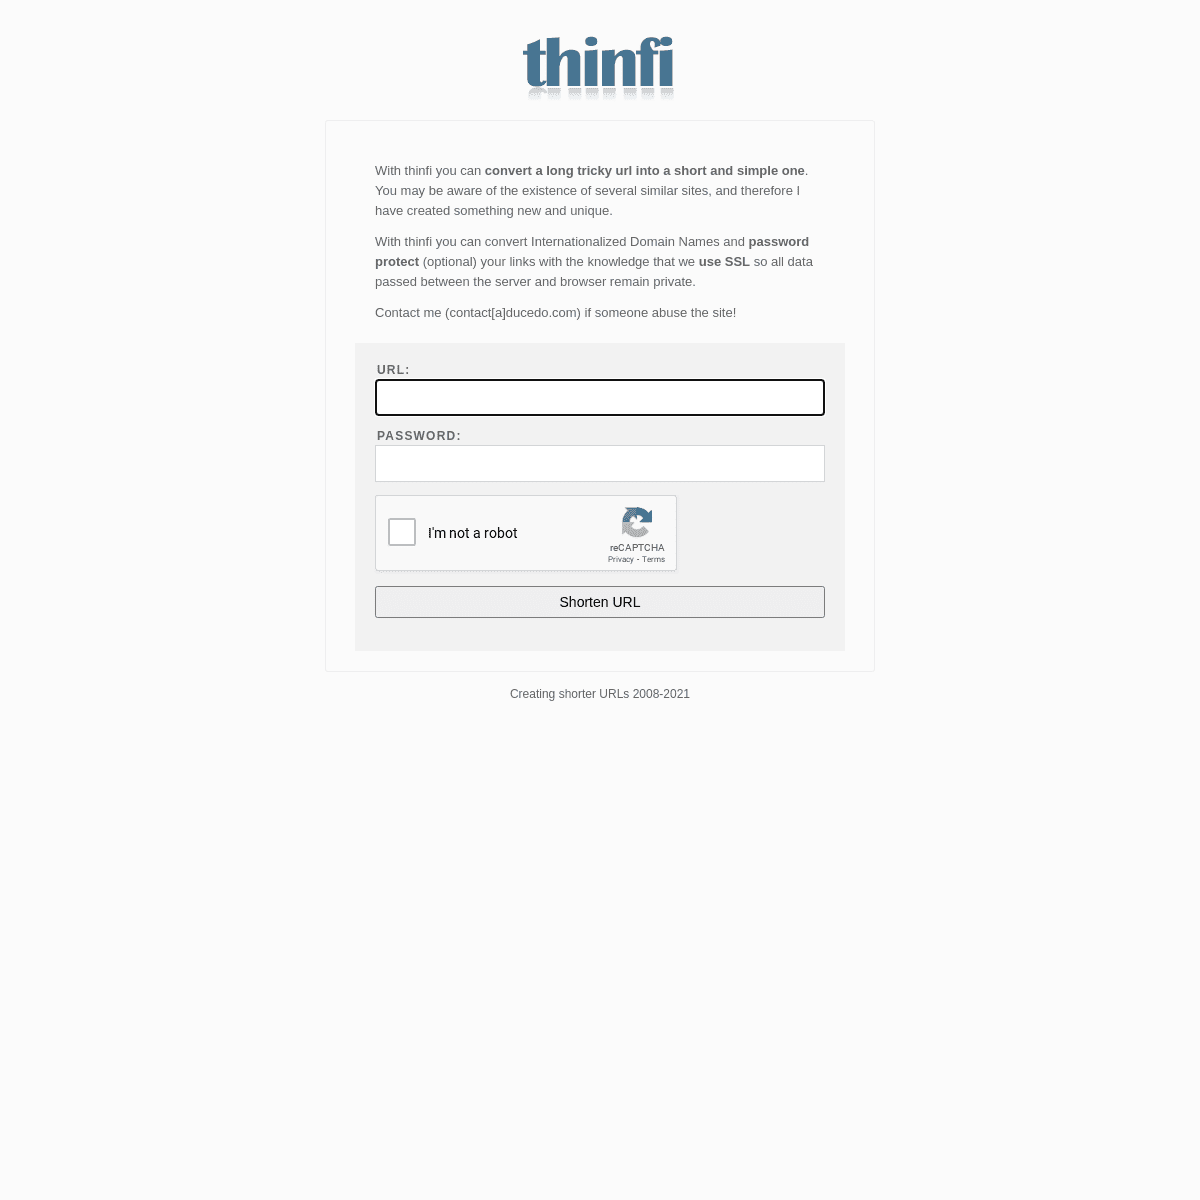 A complete backup of https://thinfi.com